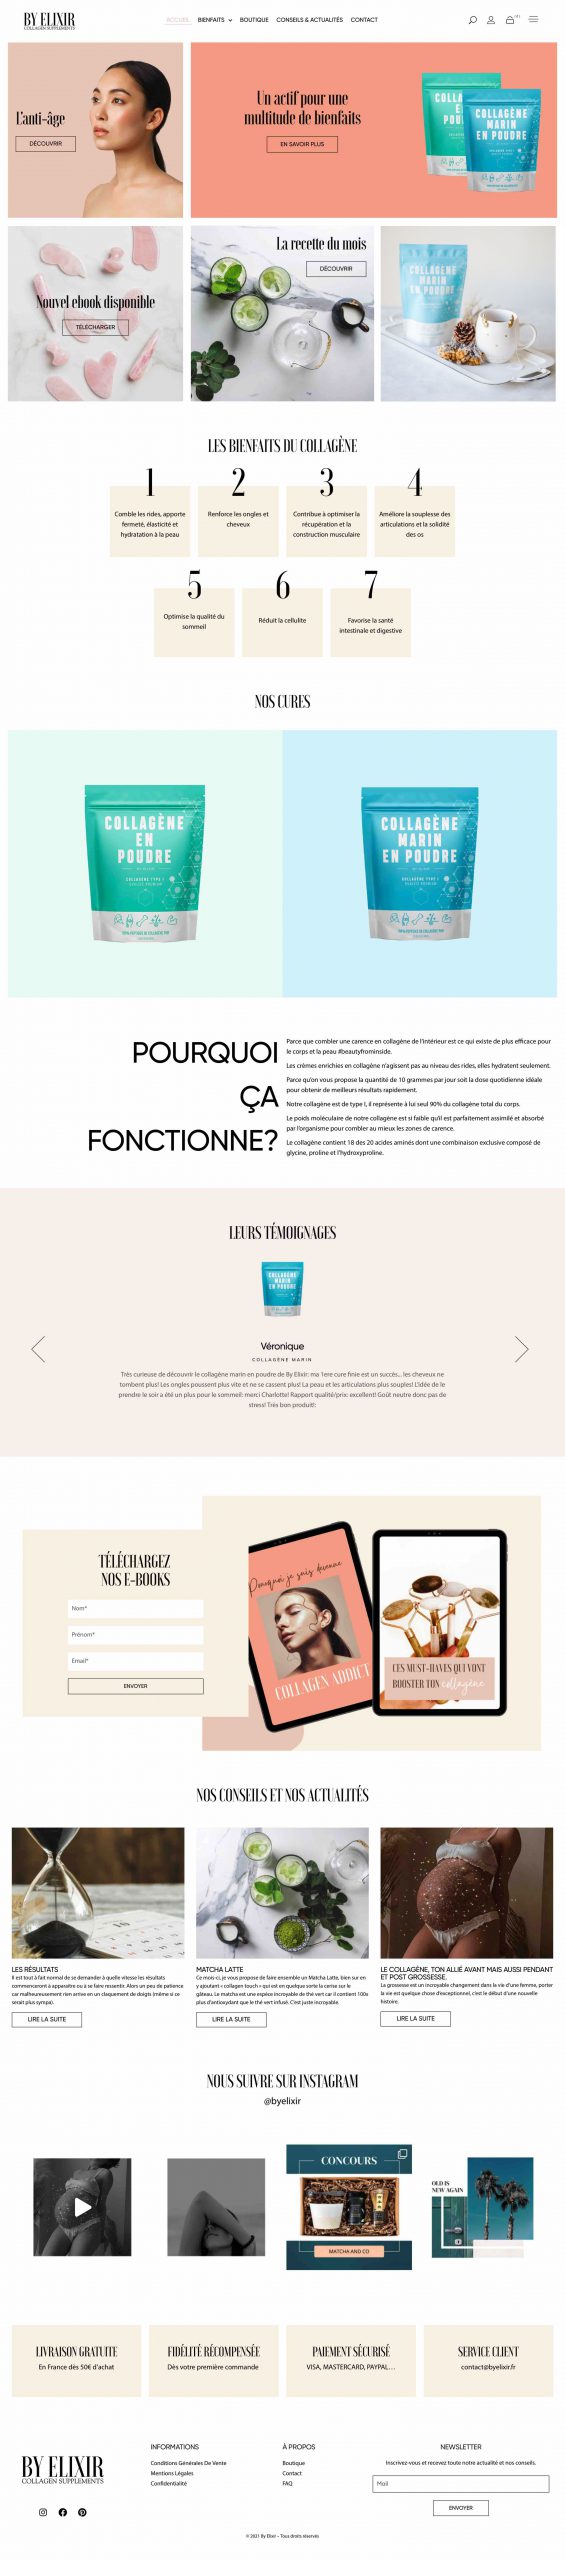 ANGELIQUE DAMOUR - projet BY ELIXIR - home page full